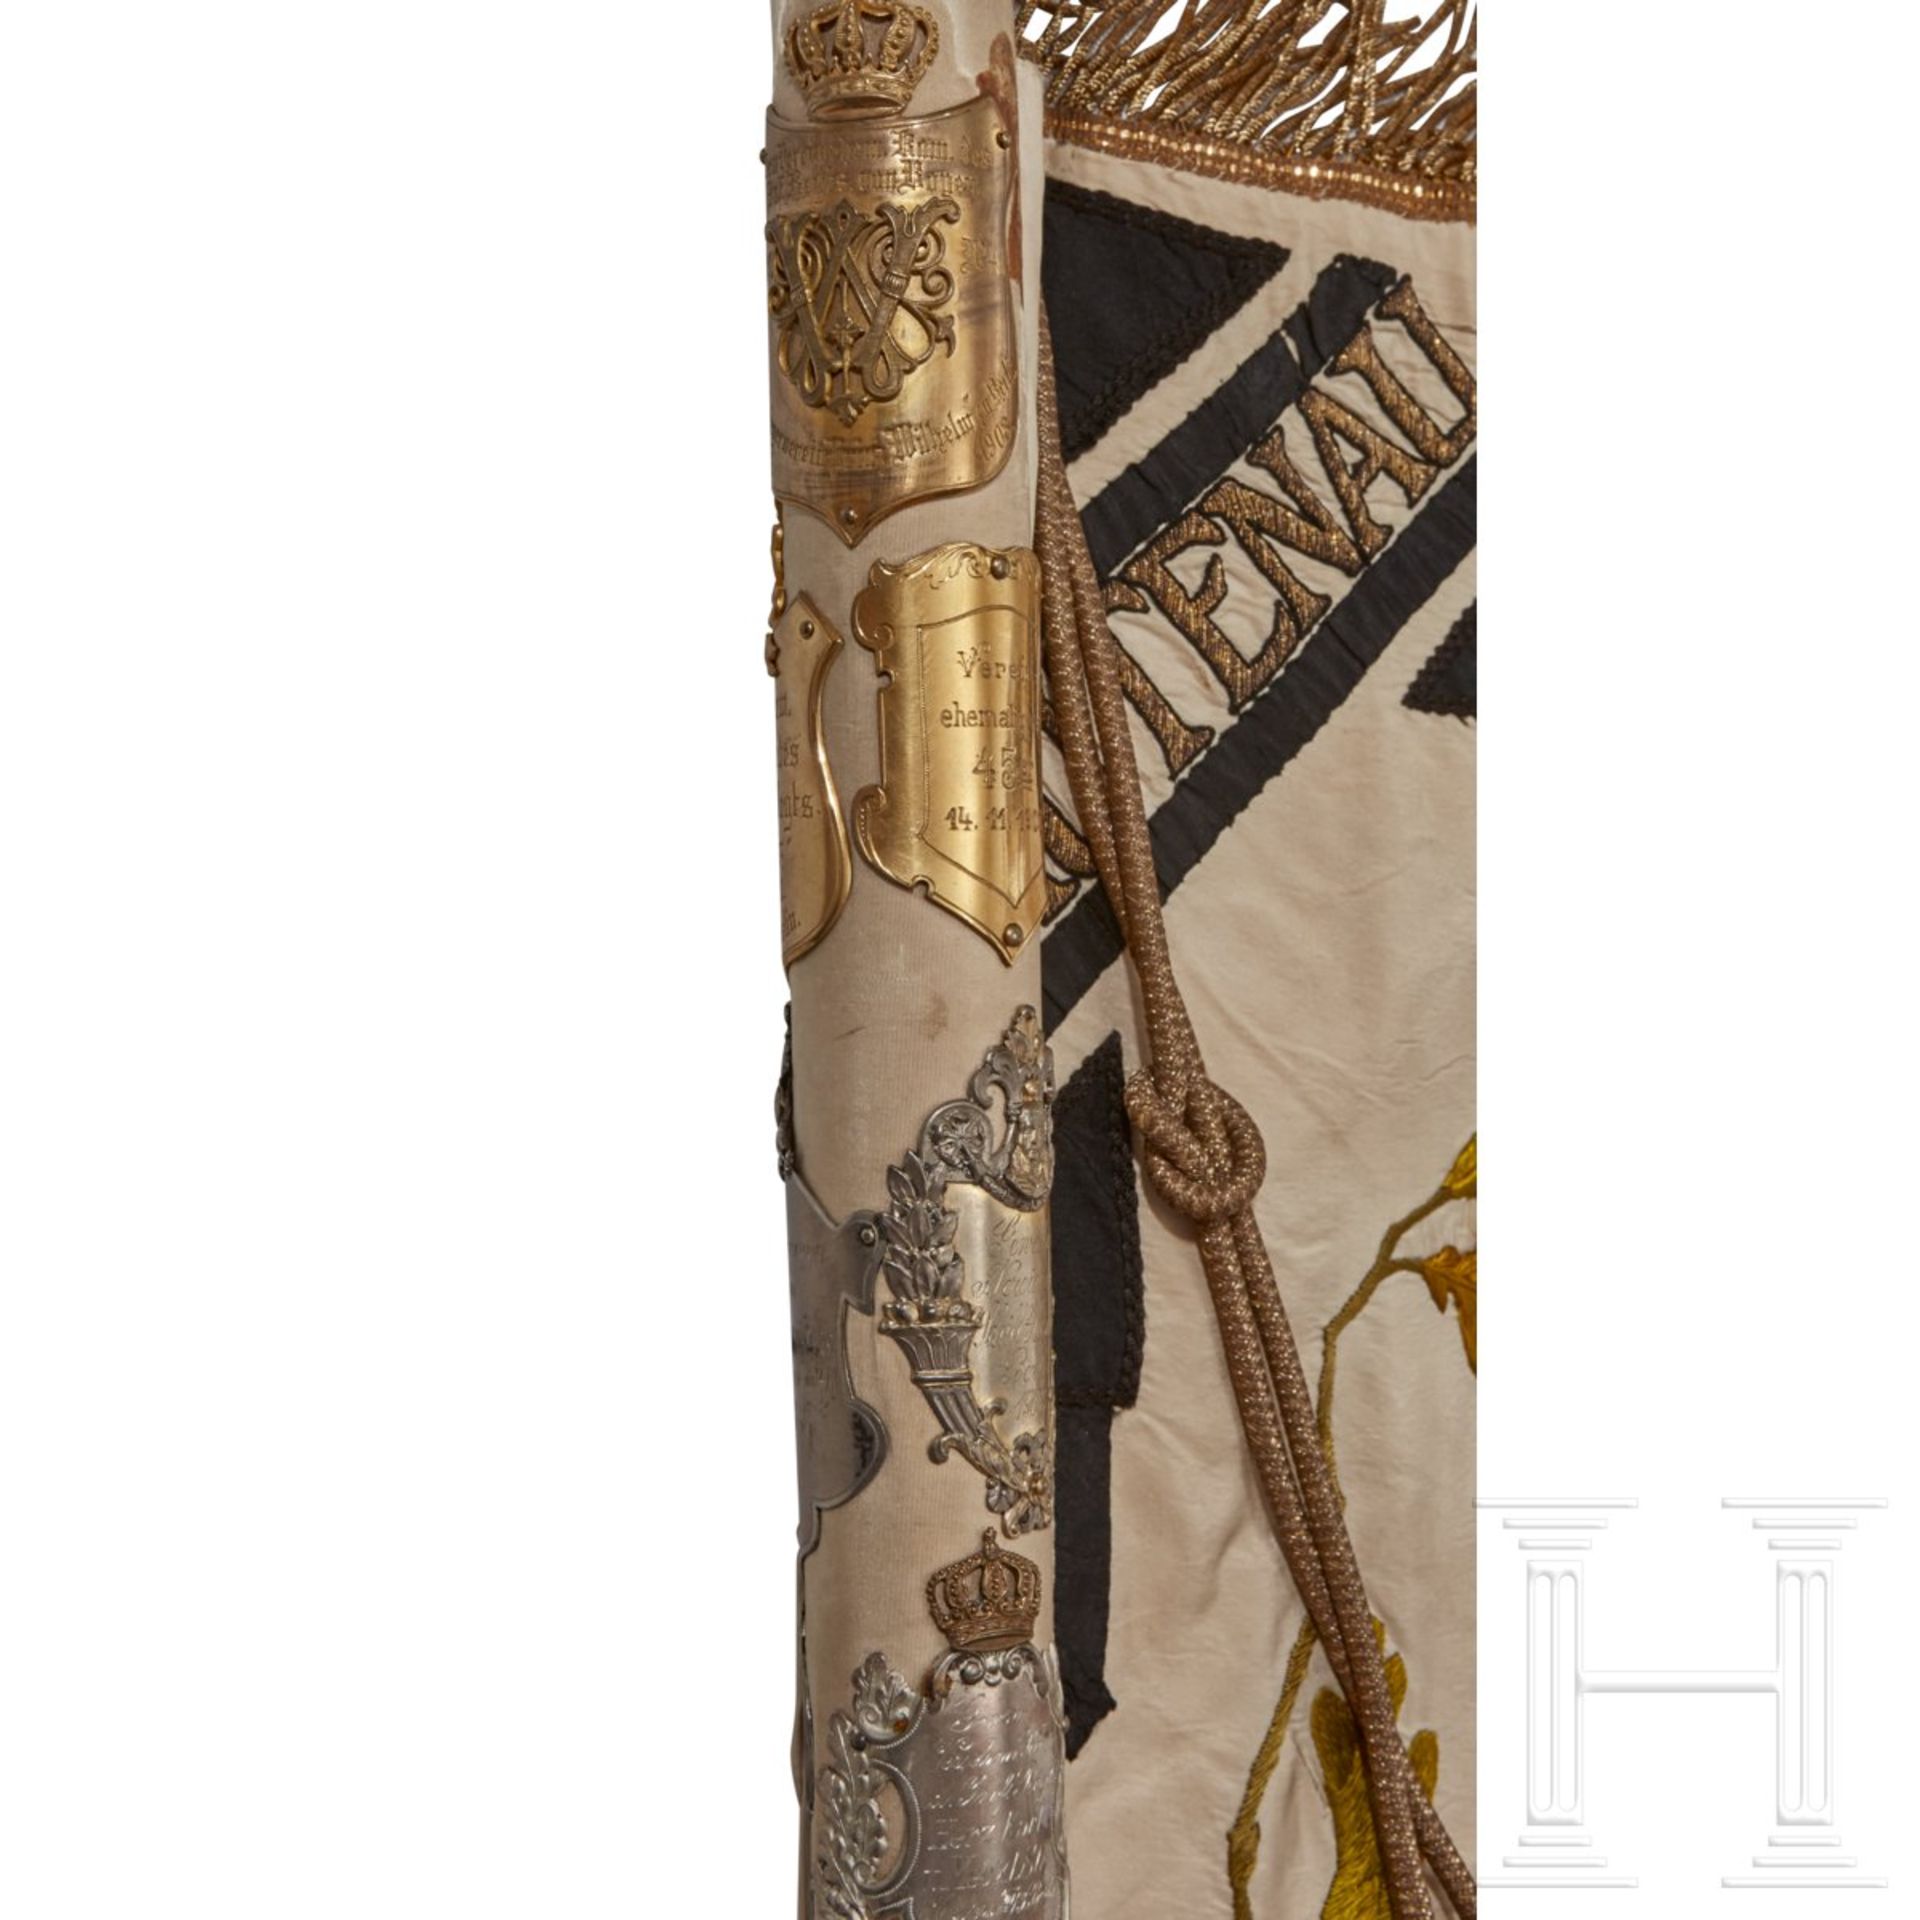 A Veteran Regimental FlagDouble sided white silk base, elaborate embroidery of various colored and - Image 6 of 11